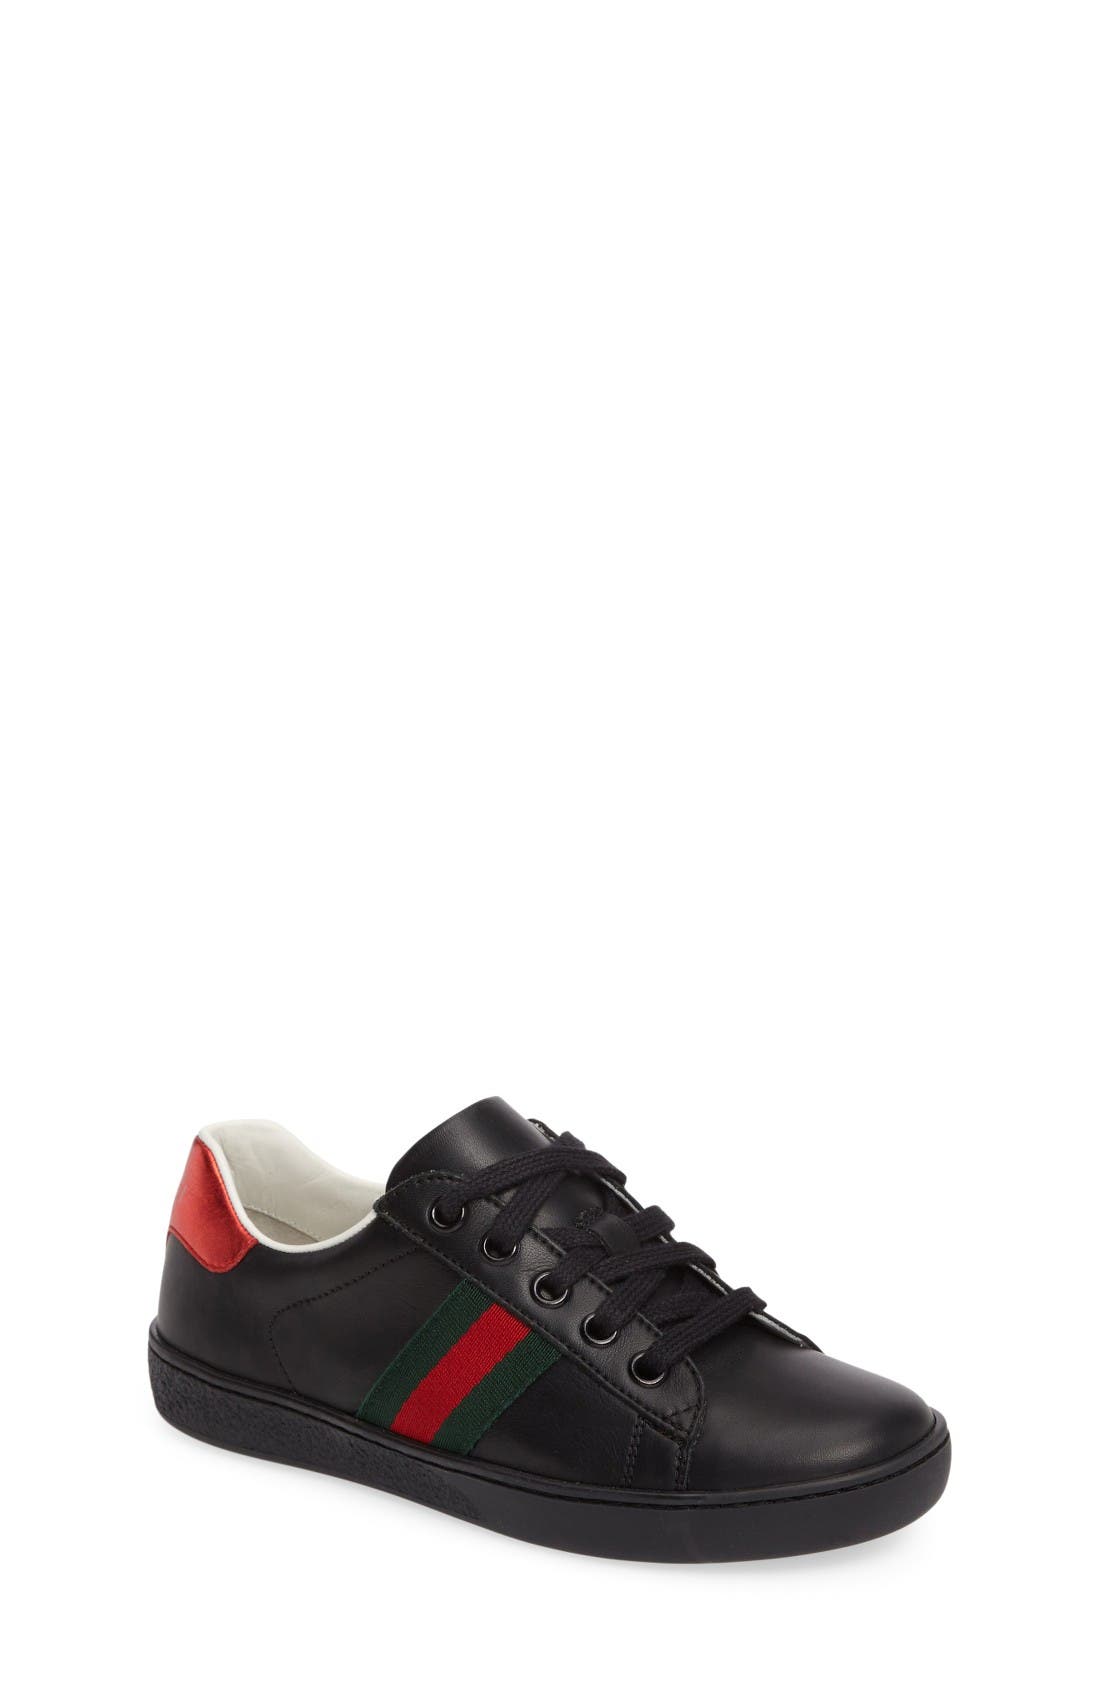 real gucci shoes for kids